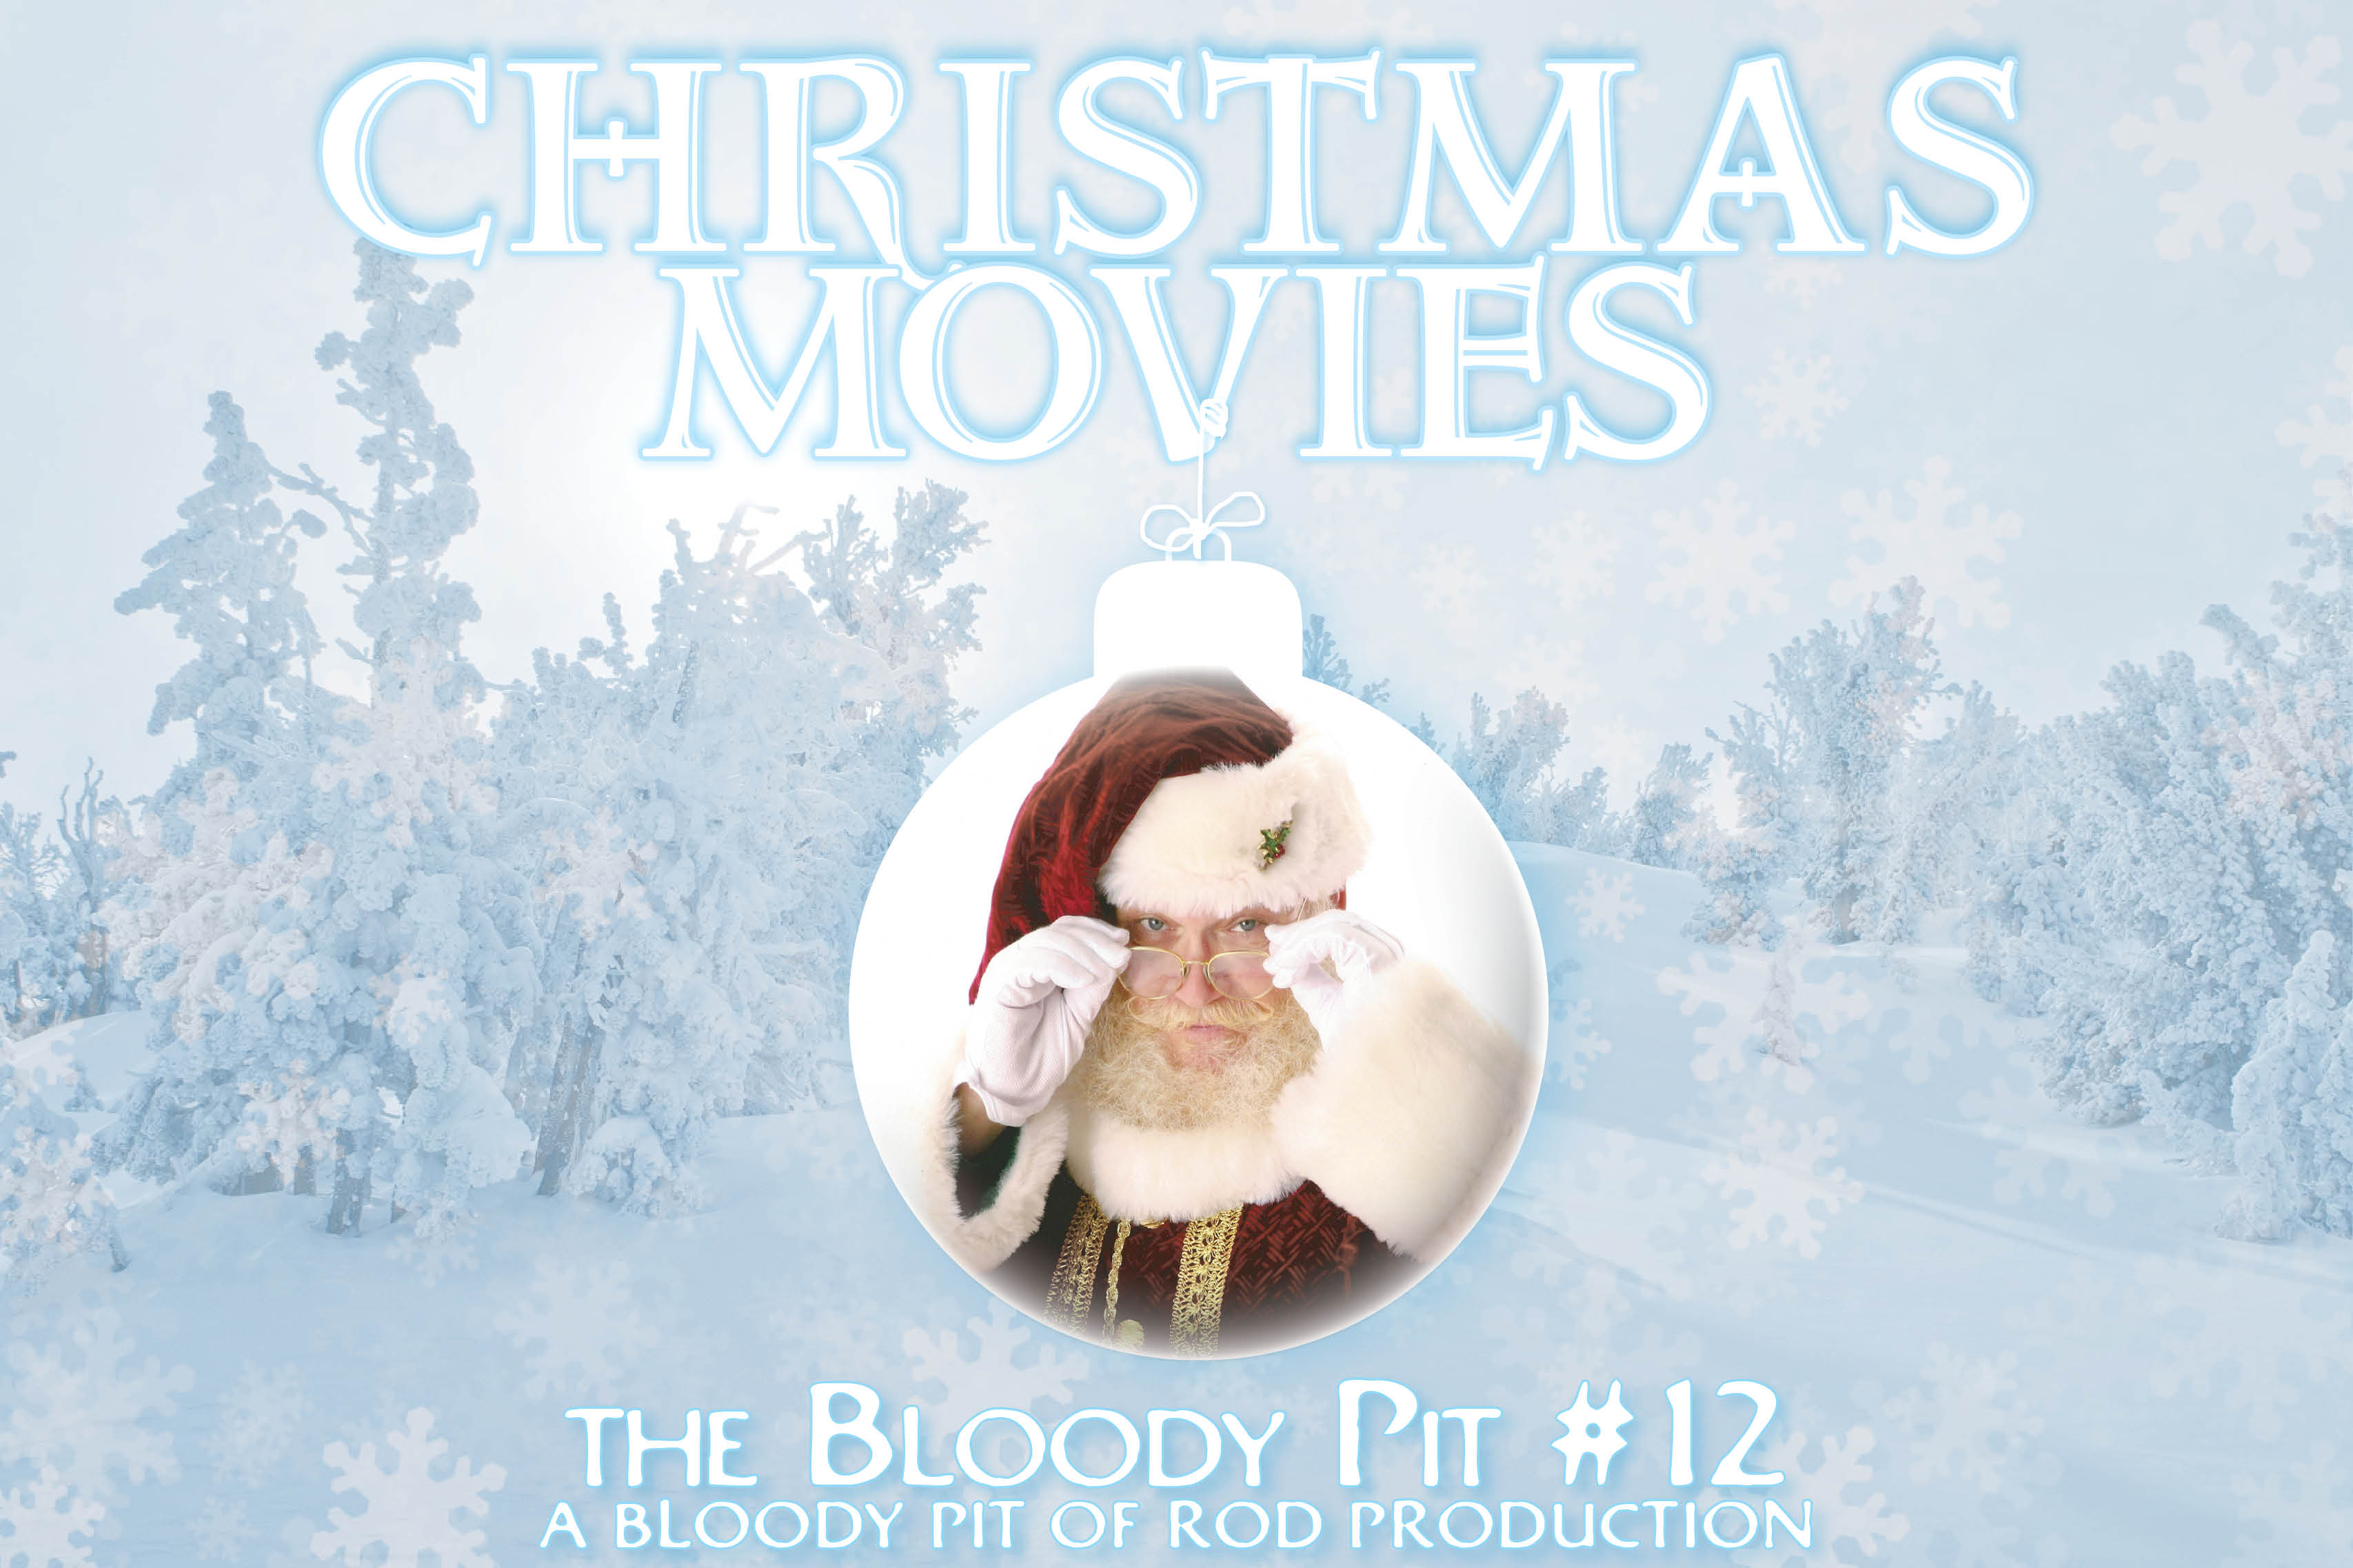 The Bloody Pit #12 - Christmas Movies